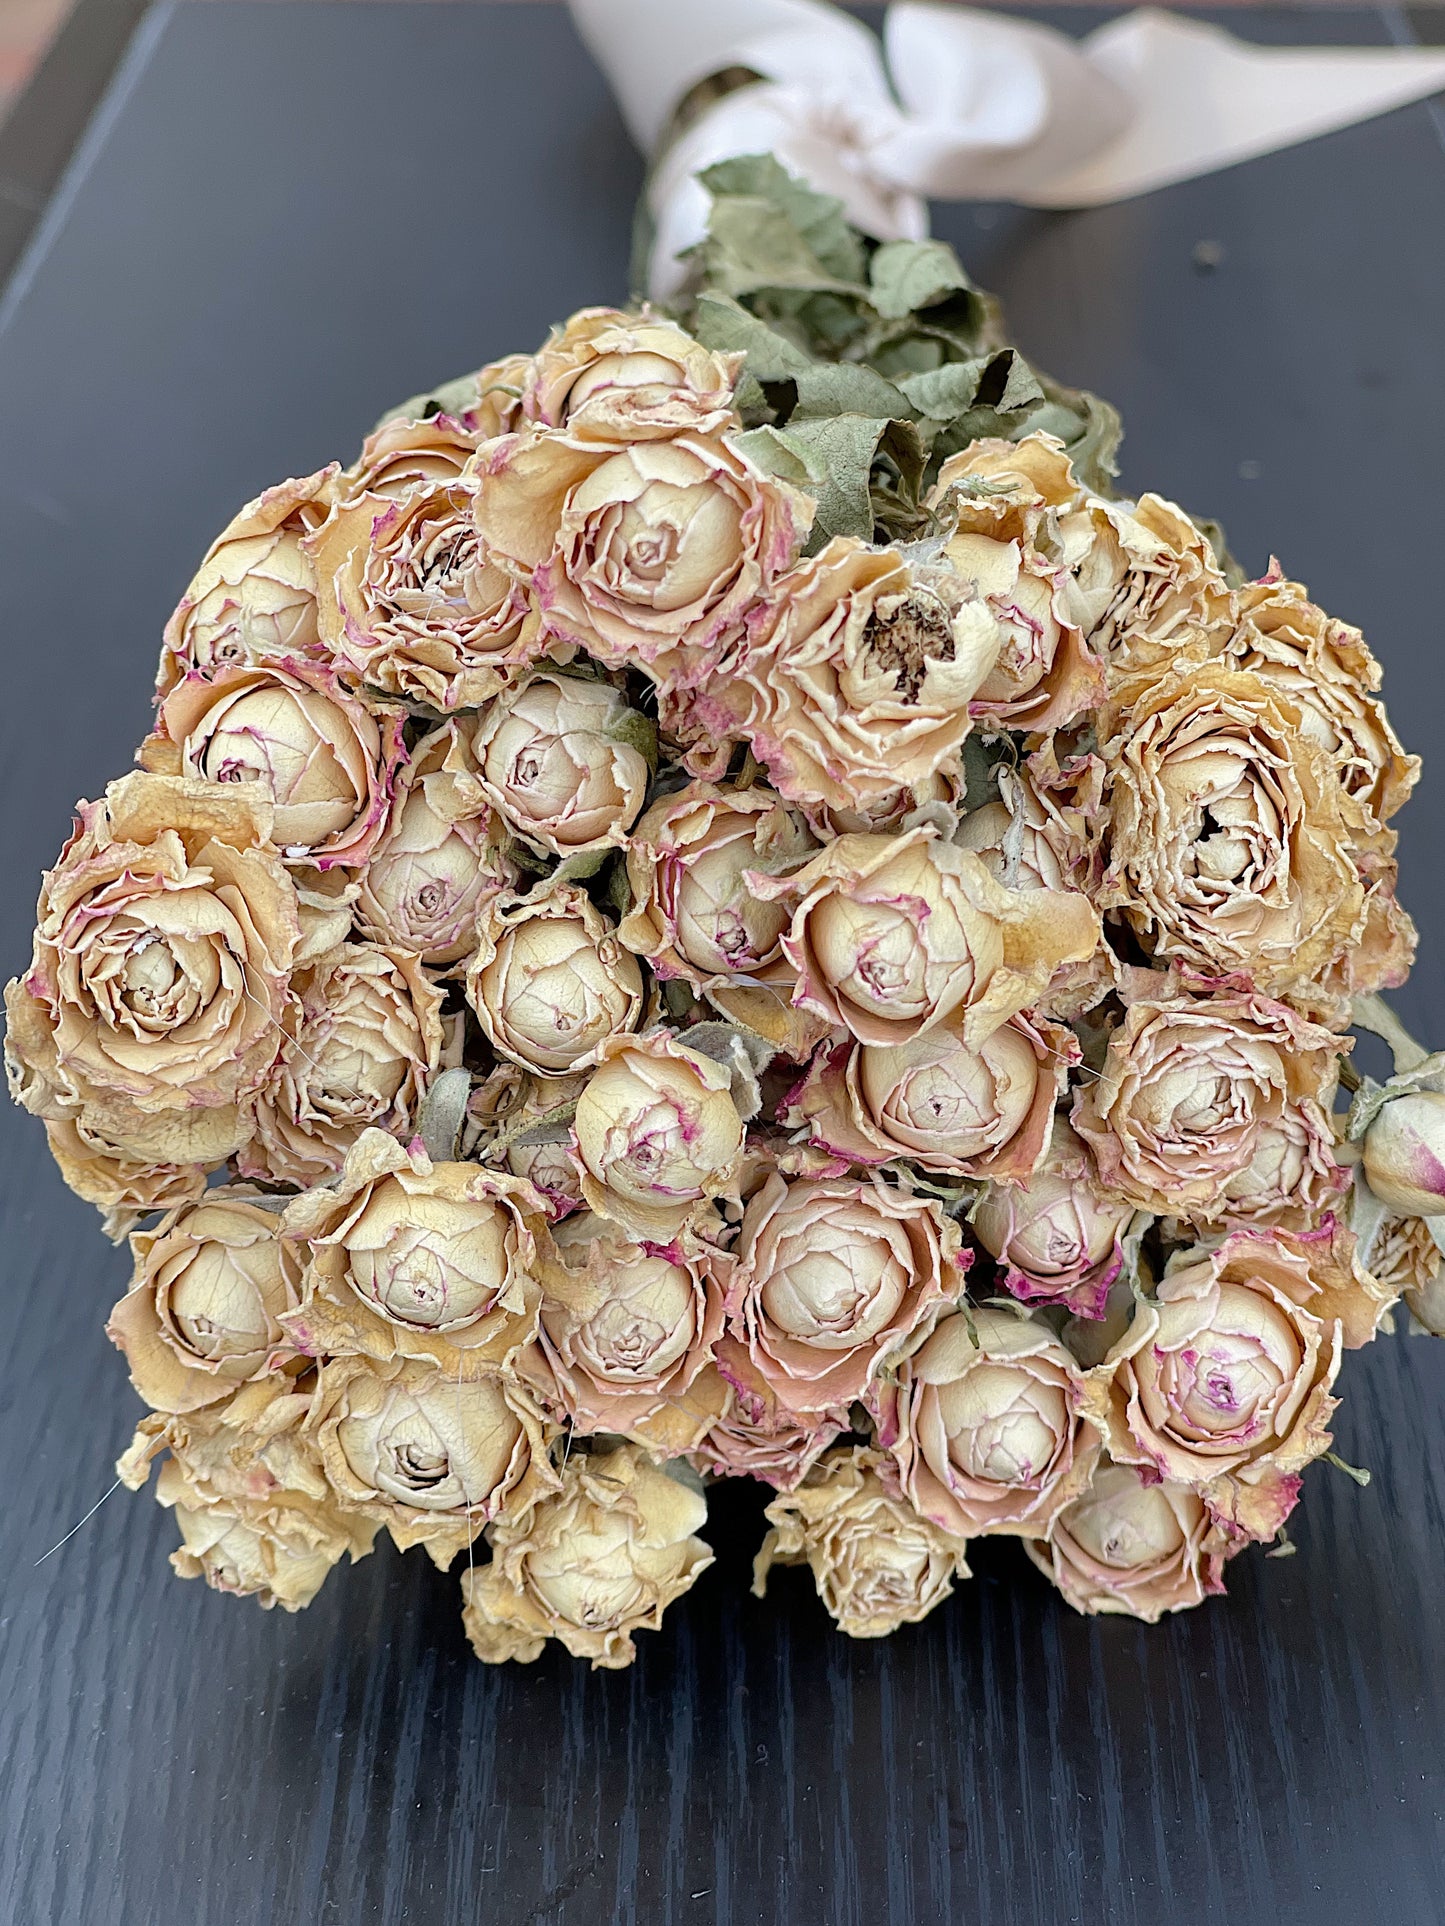 Dried bouquet of roses